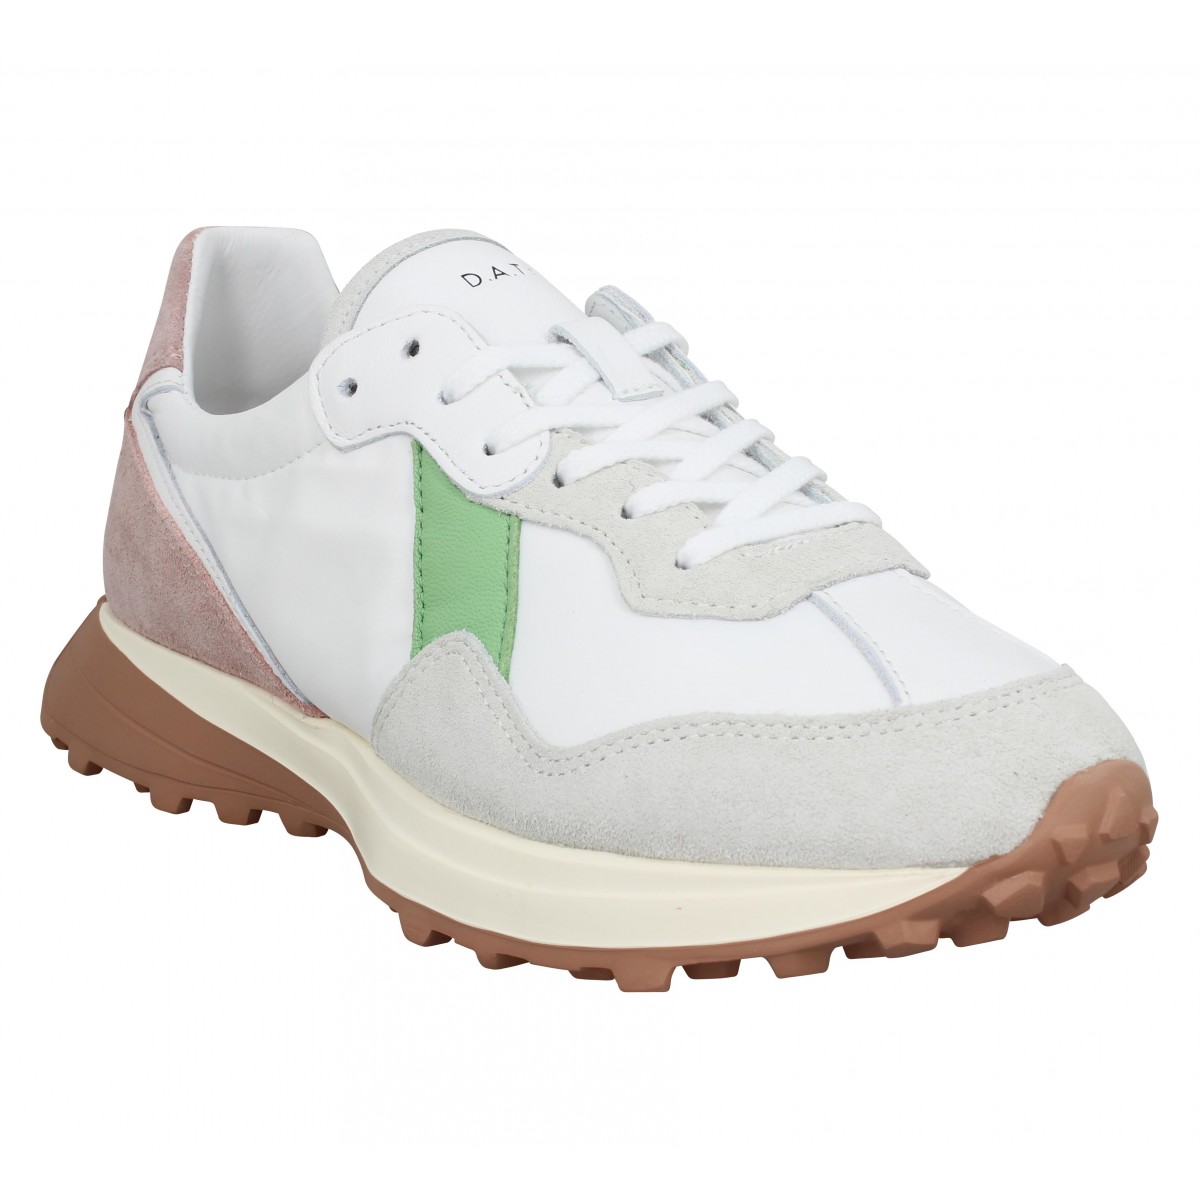 Baskets DATE SNEAKERS Vetta Colored velours toile Femme Blanc Rose